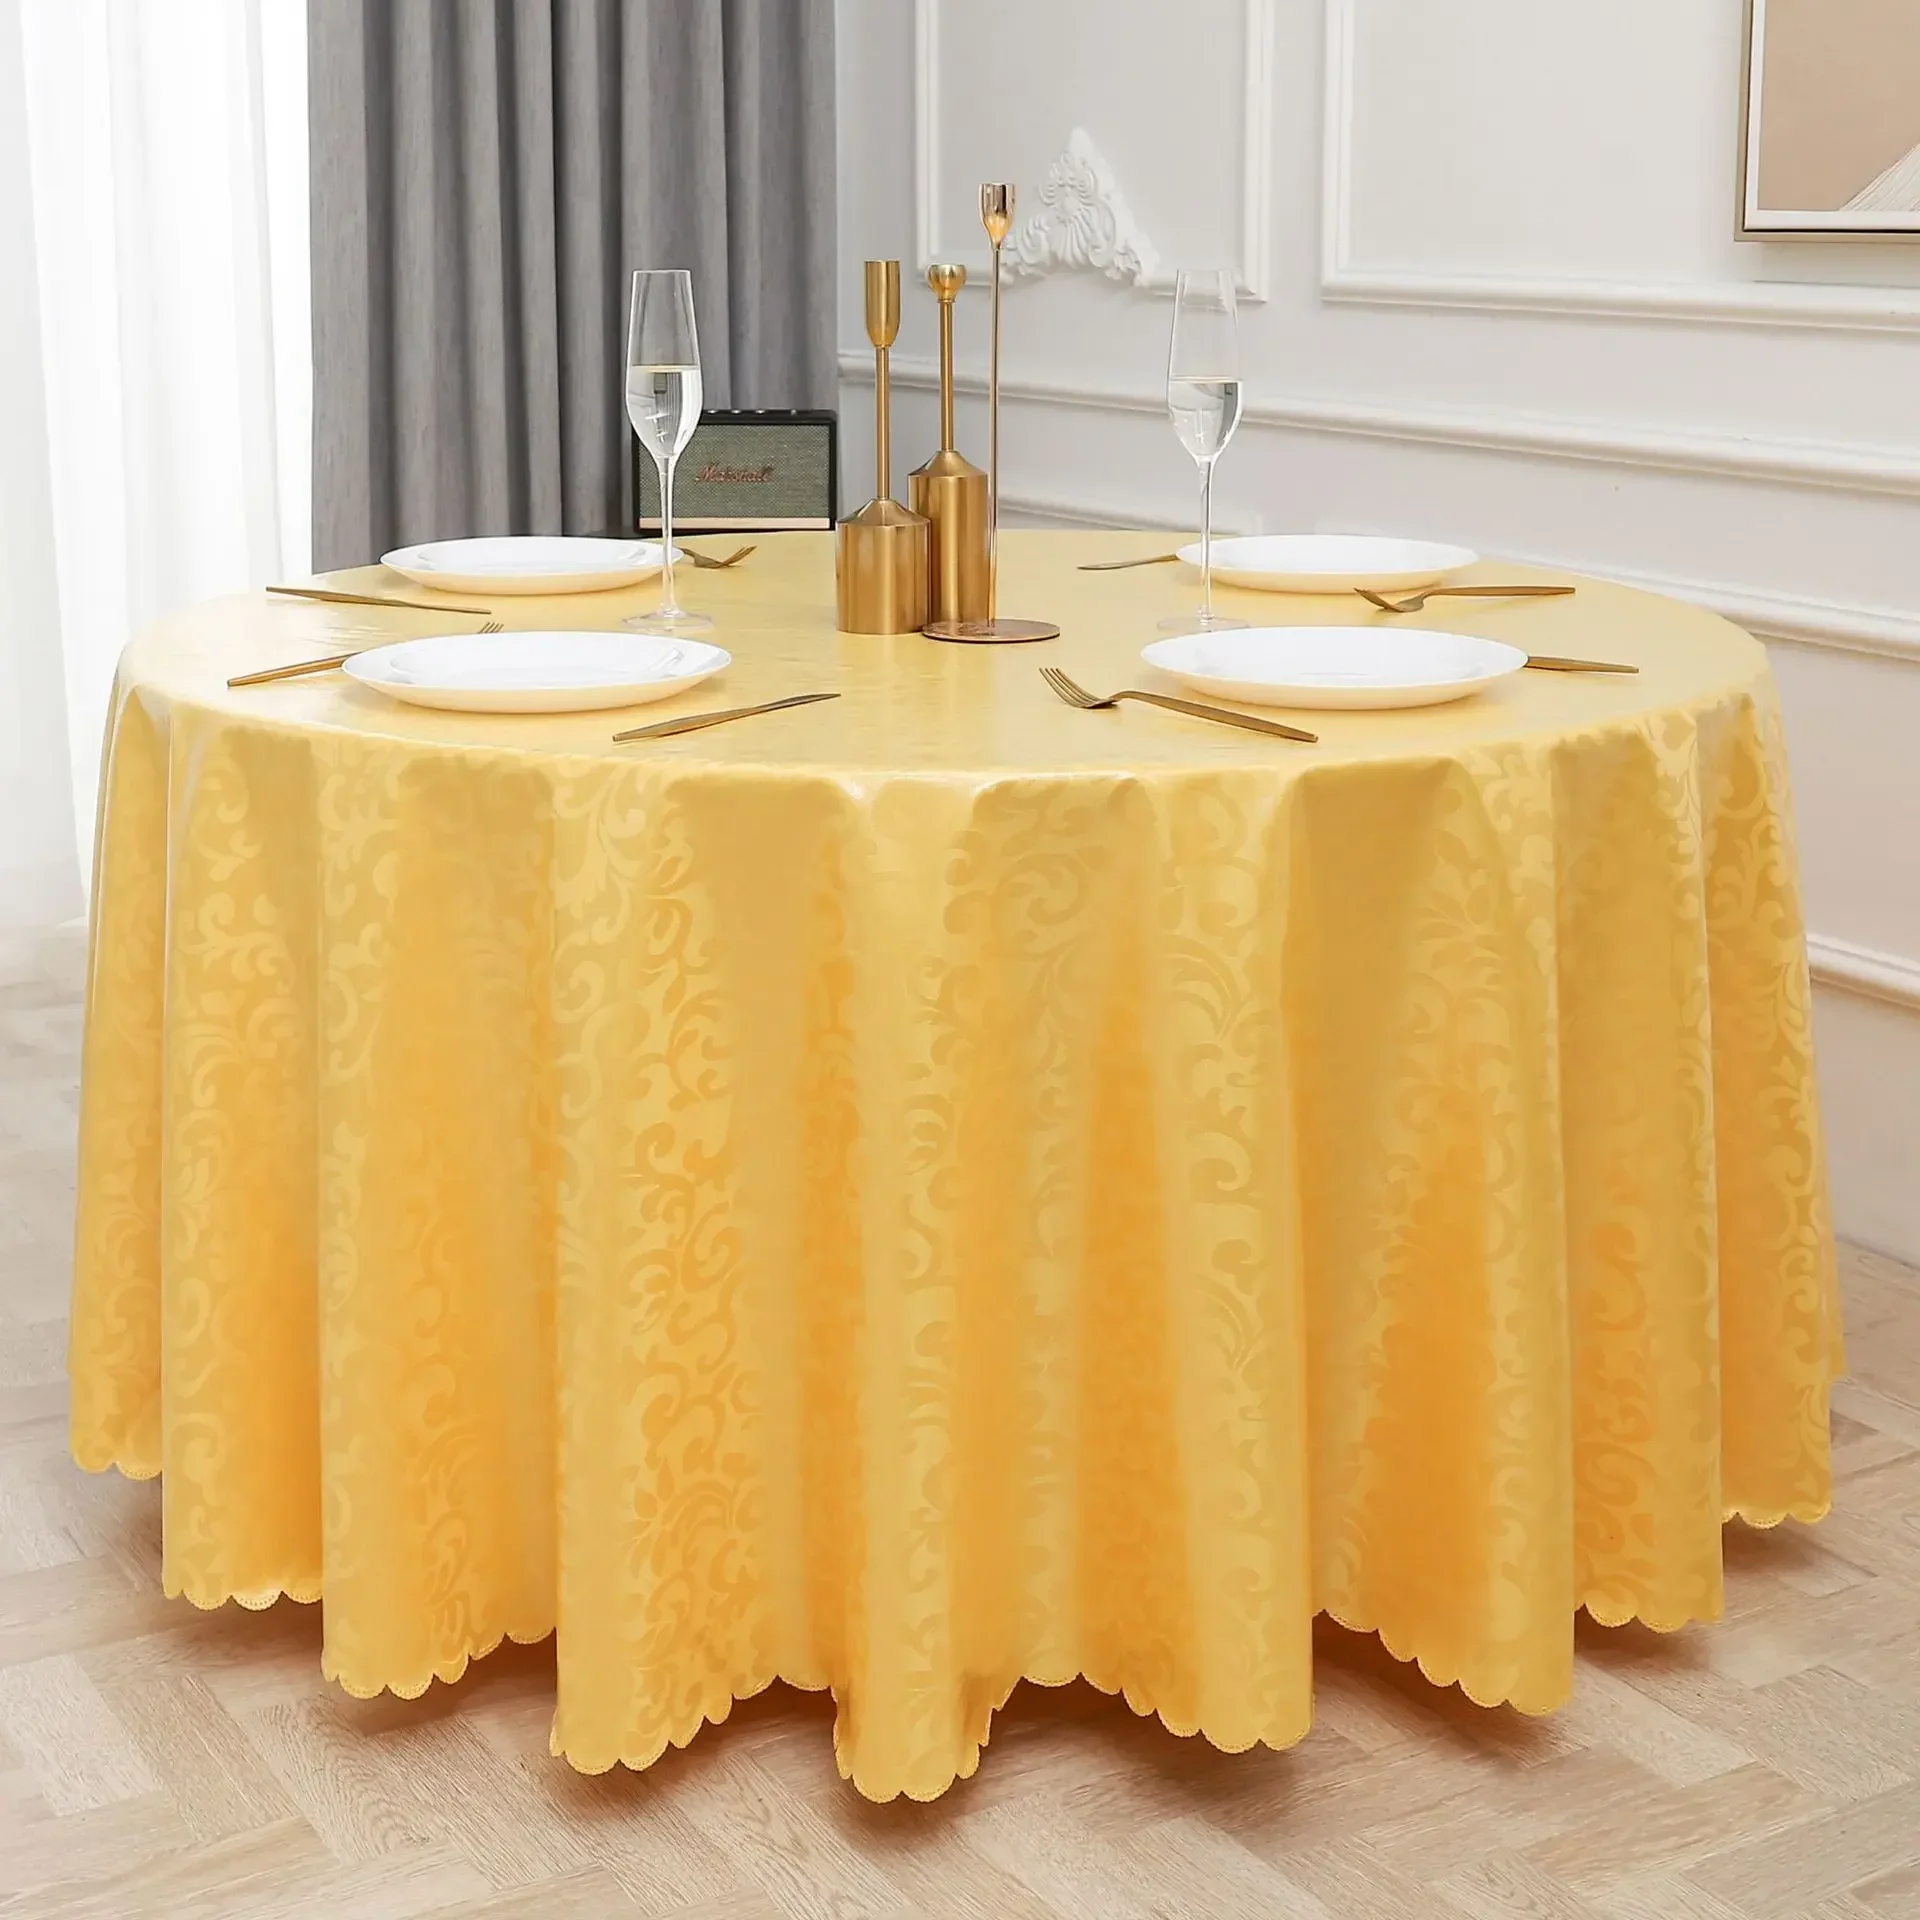 

Banquet Universal tablecloth wholesale Hotel Restaurant solid color table white rectangular polyester blue